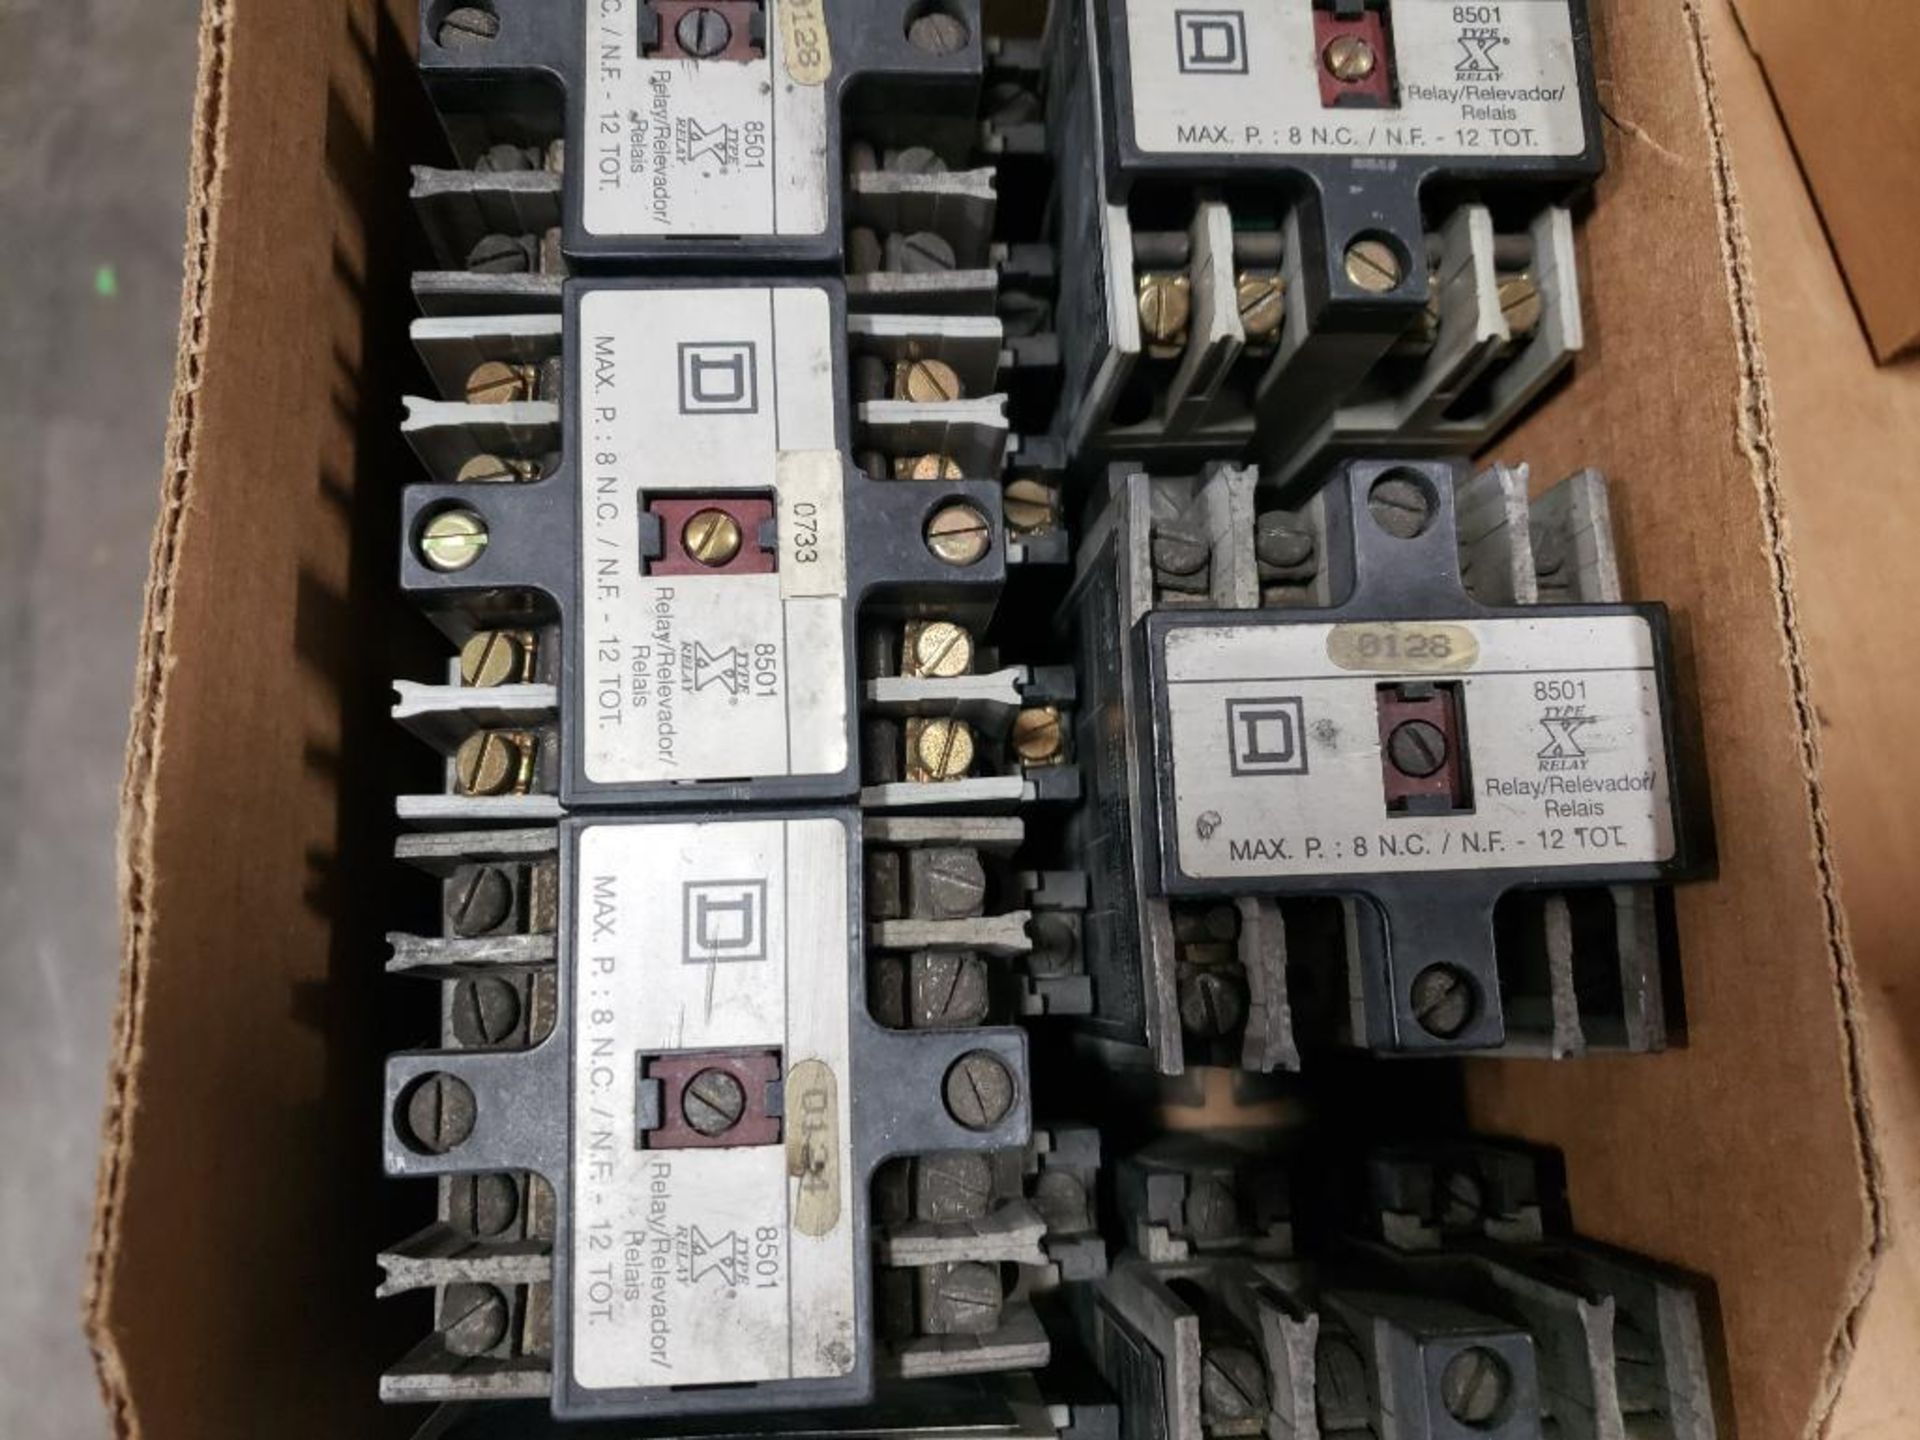 Qty 7 - Square-D control relay. 8501-X0-20, 120V-coil. - Image 3 of 4